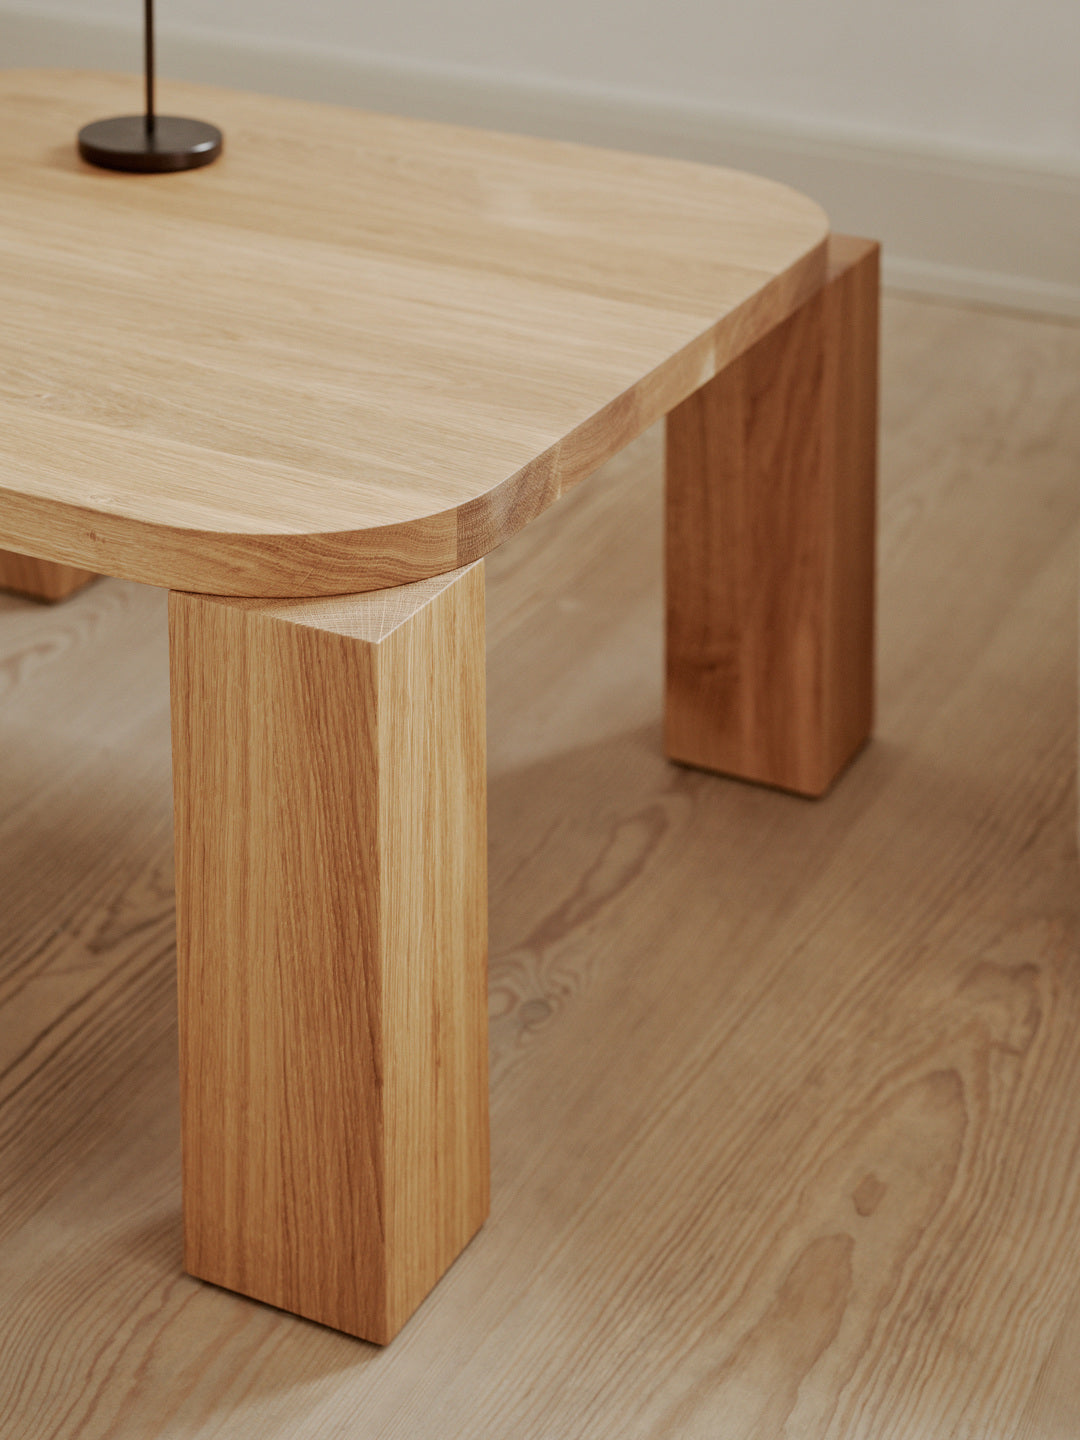 New Works Atlas Coffee Table Natural Oak, 60x60 Cm